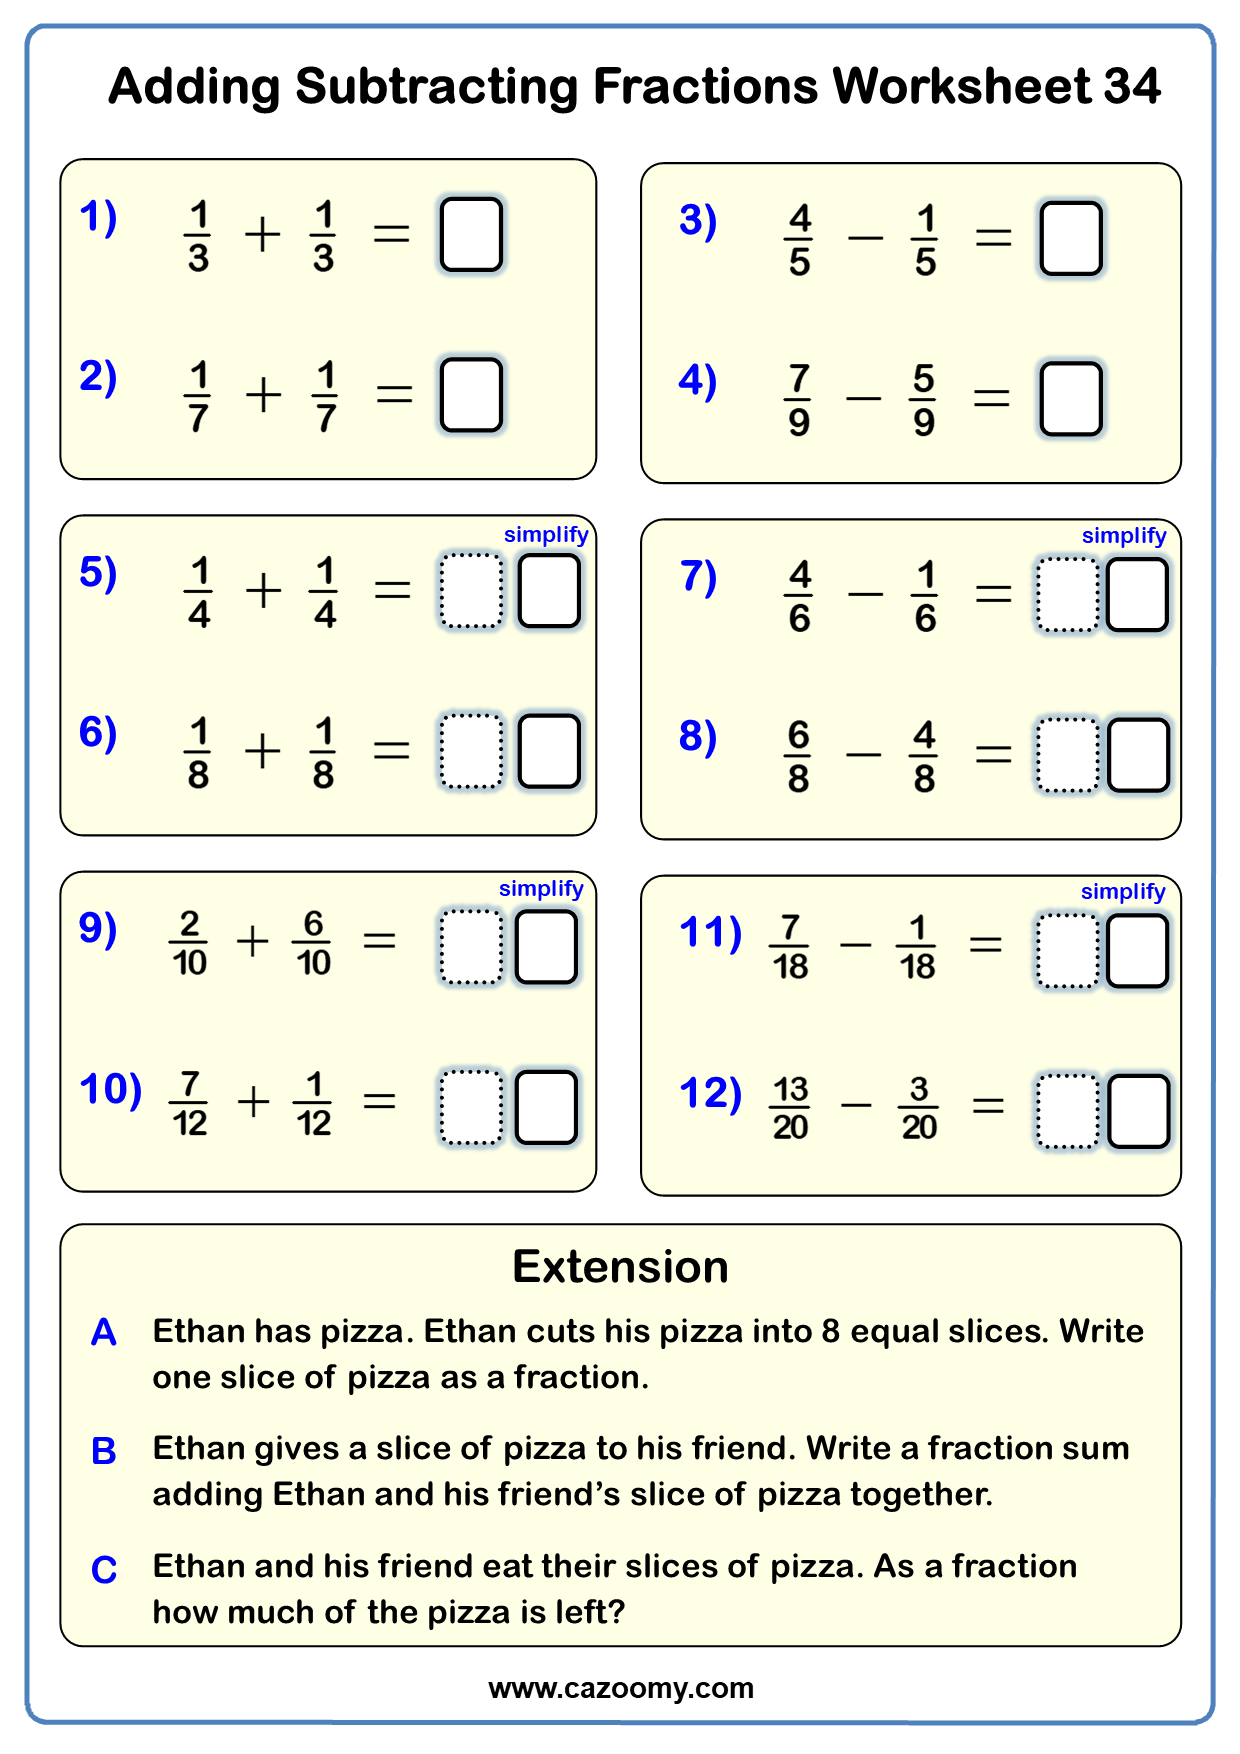 Adding Fractions Worksheets - New & Engaging  Cazoomy Within Adding Fractions Worksheet Pdf